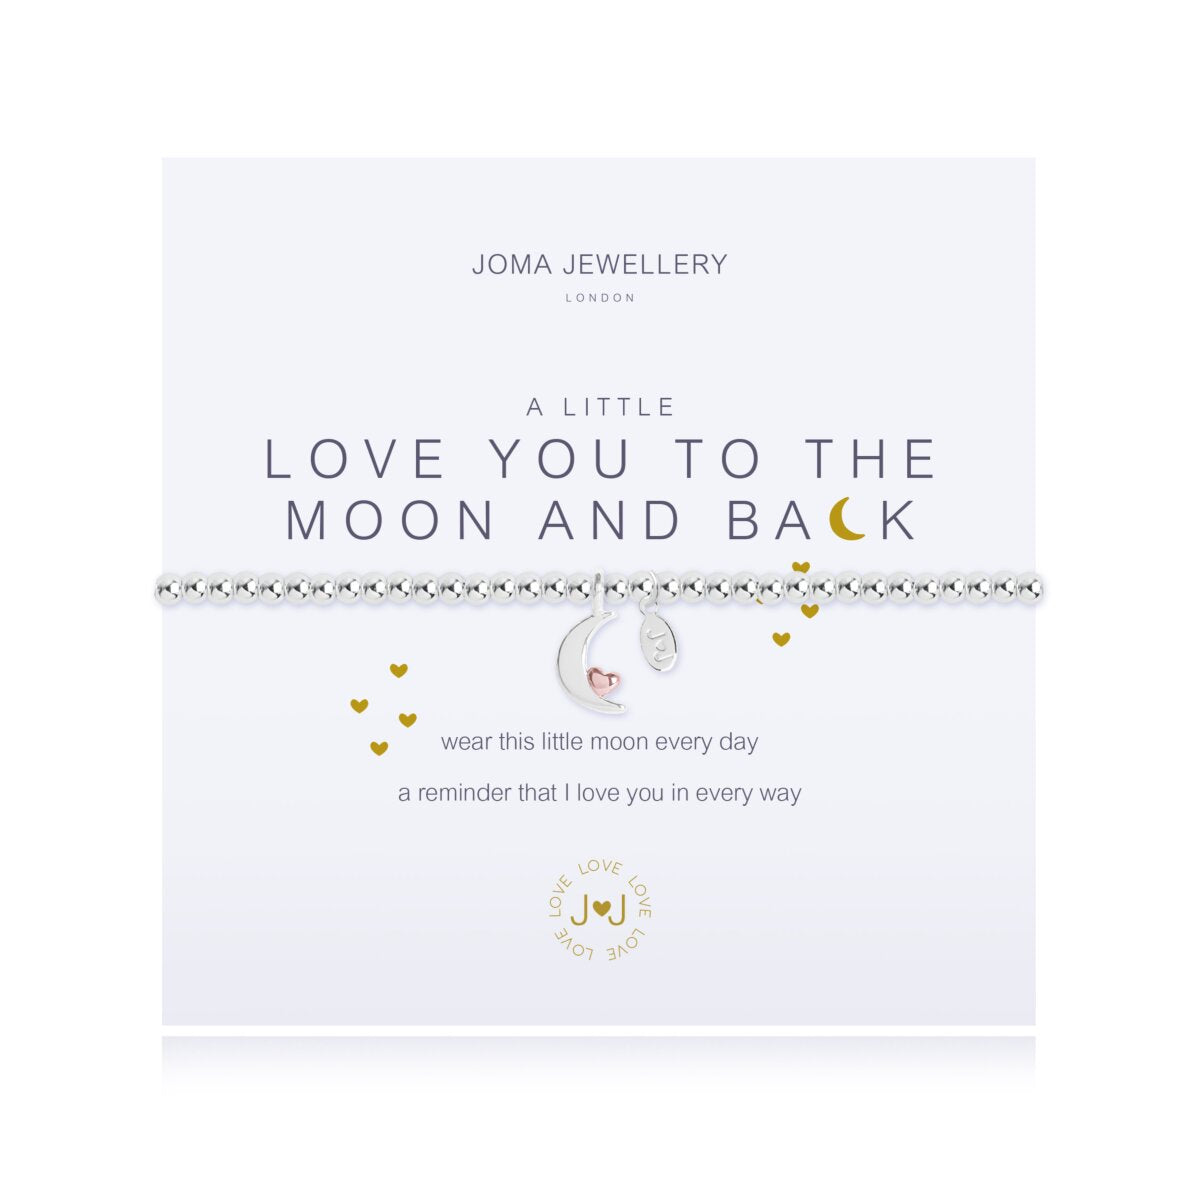 Joma Jewellery Love You To The Moon & Back Silver Plated Bracelet with Moon & Heart Charm on Presentation Card